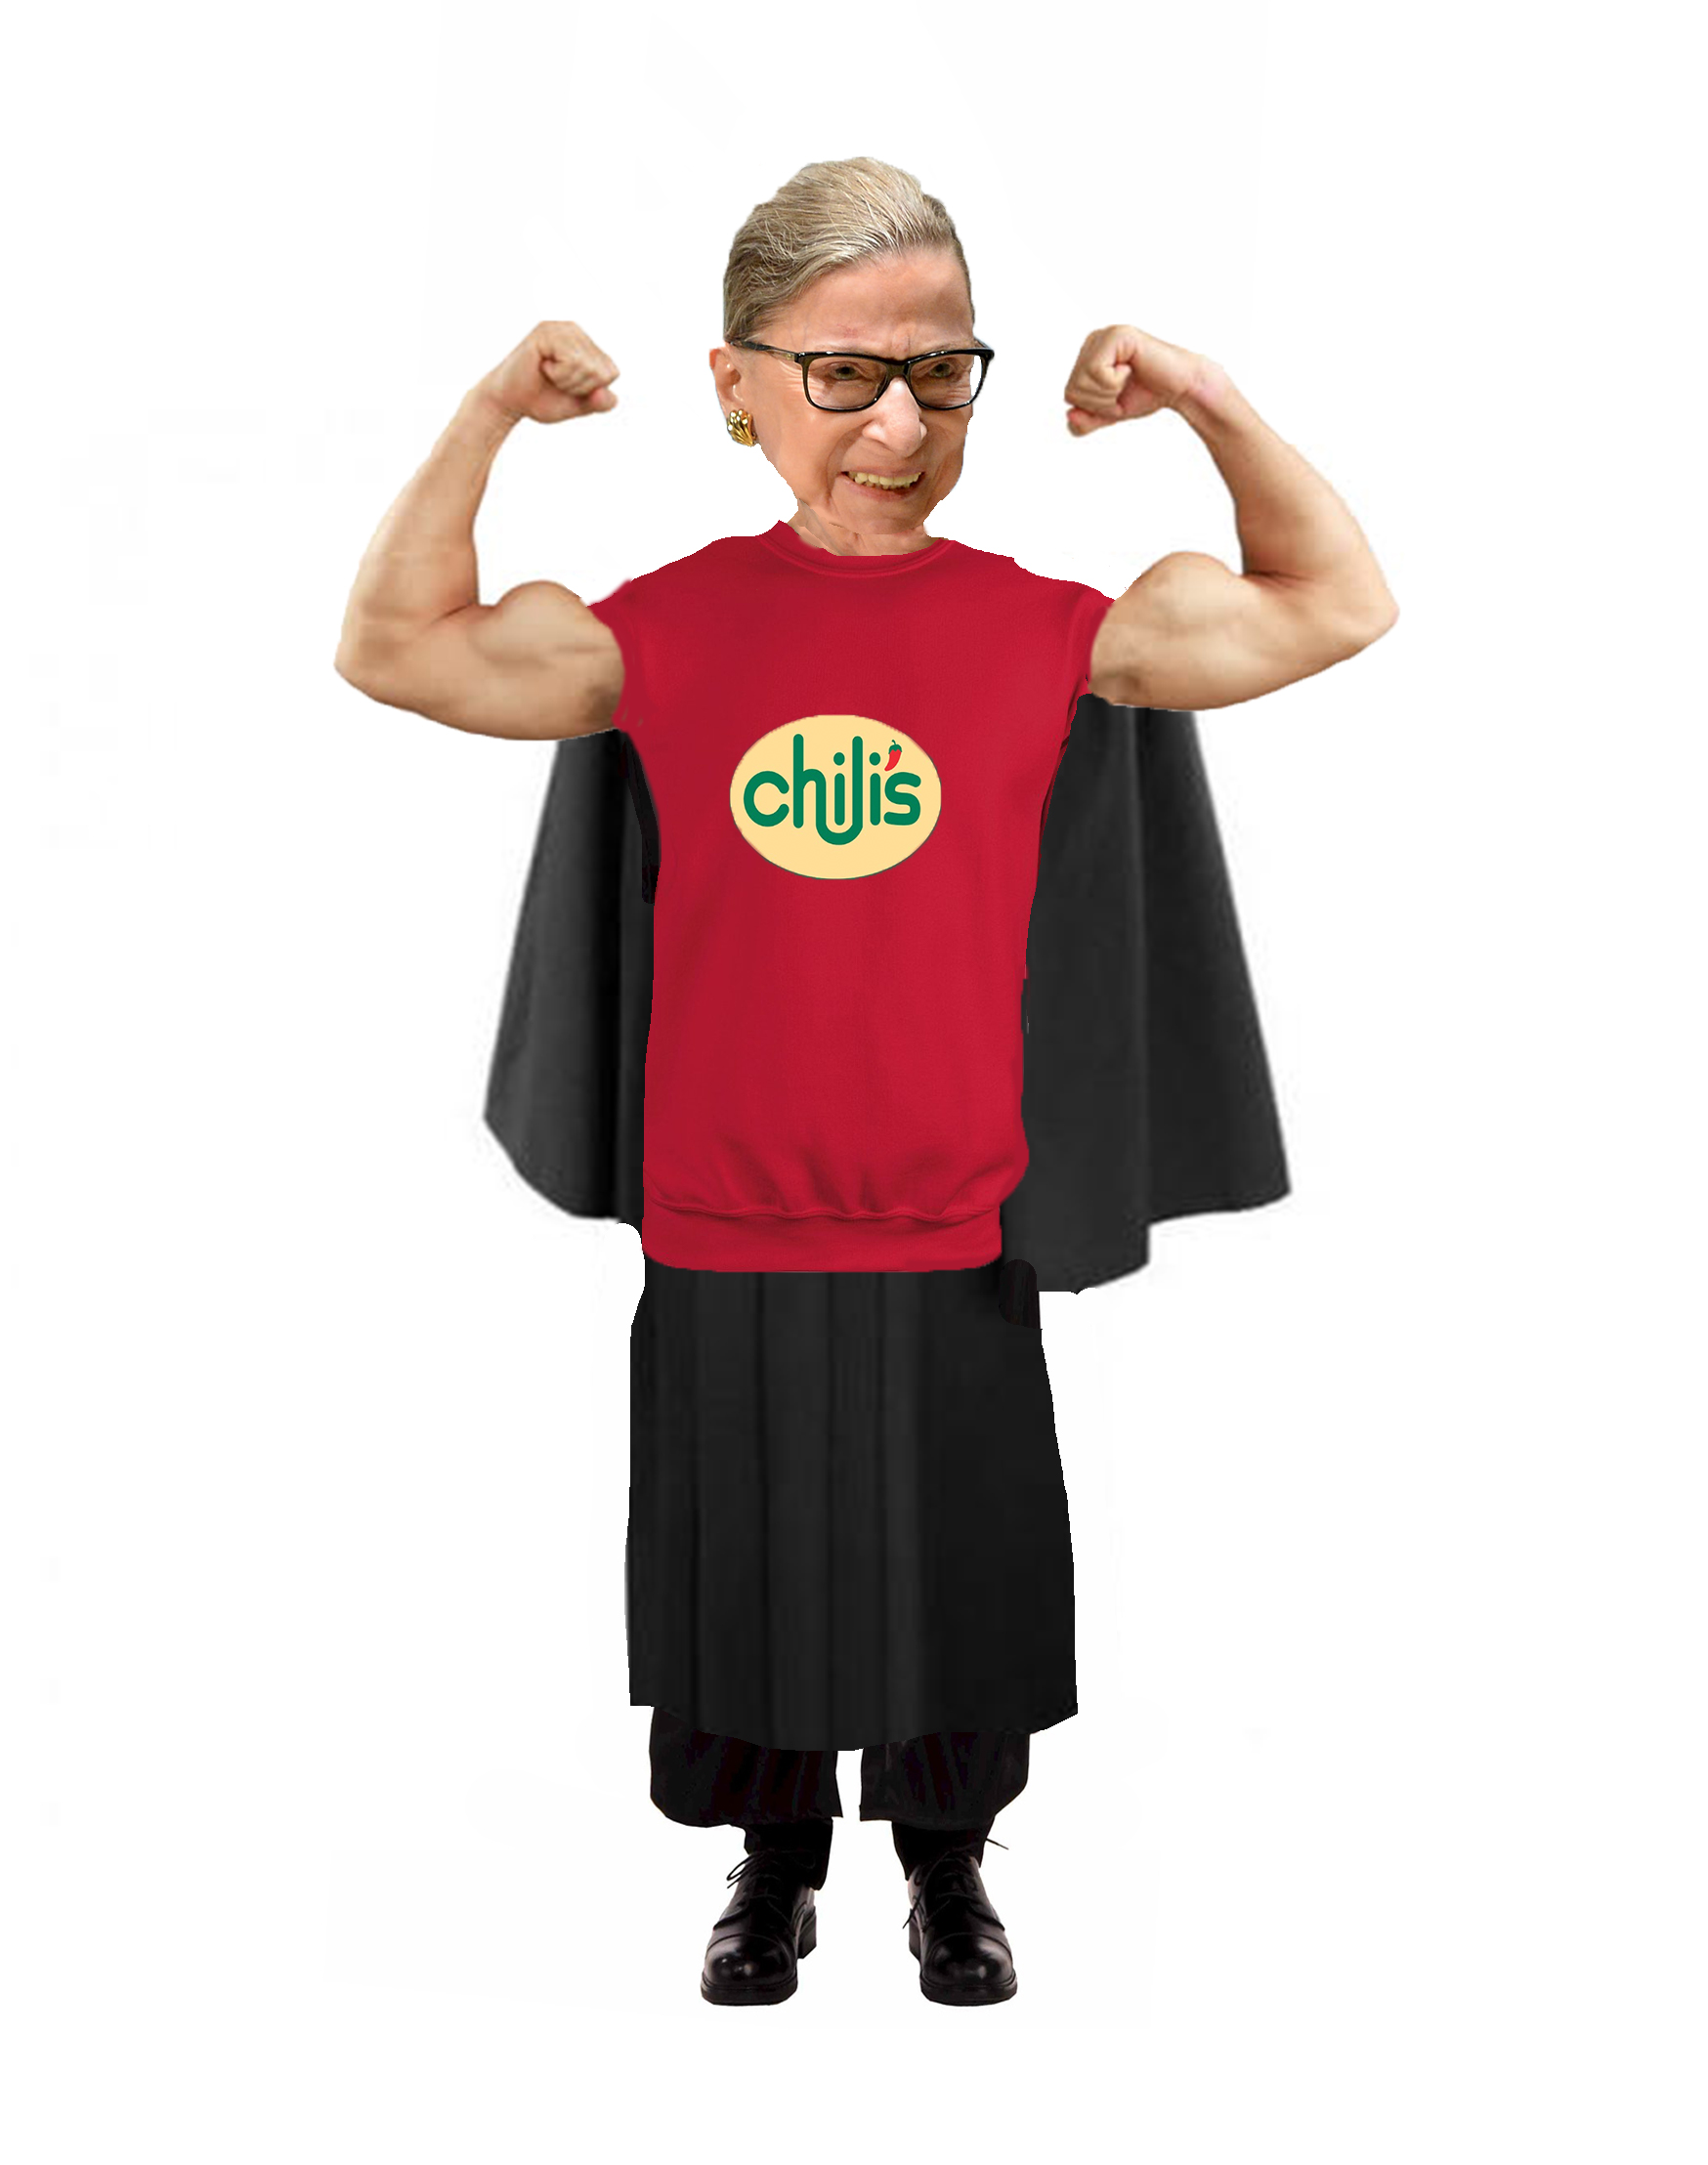 Chili’s Confirms RBG’s Reported Hospitalization a Publicity Stunt to Advertise Their Delicious Baby Back Ribs